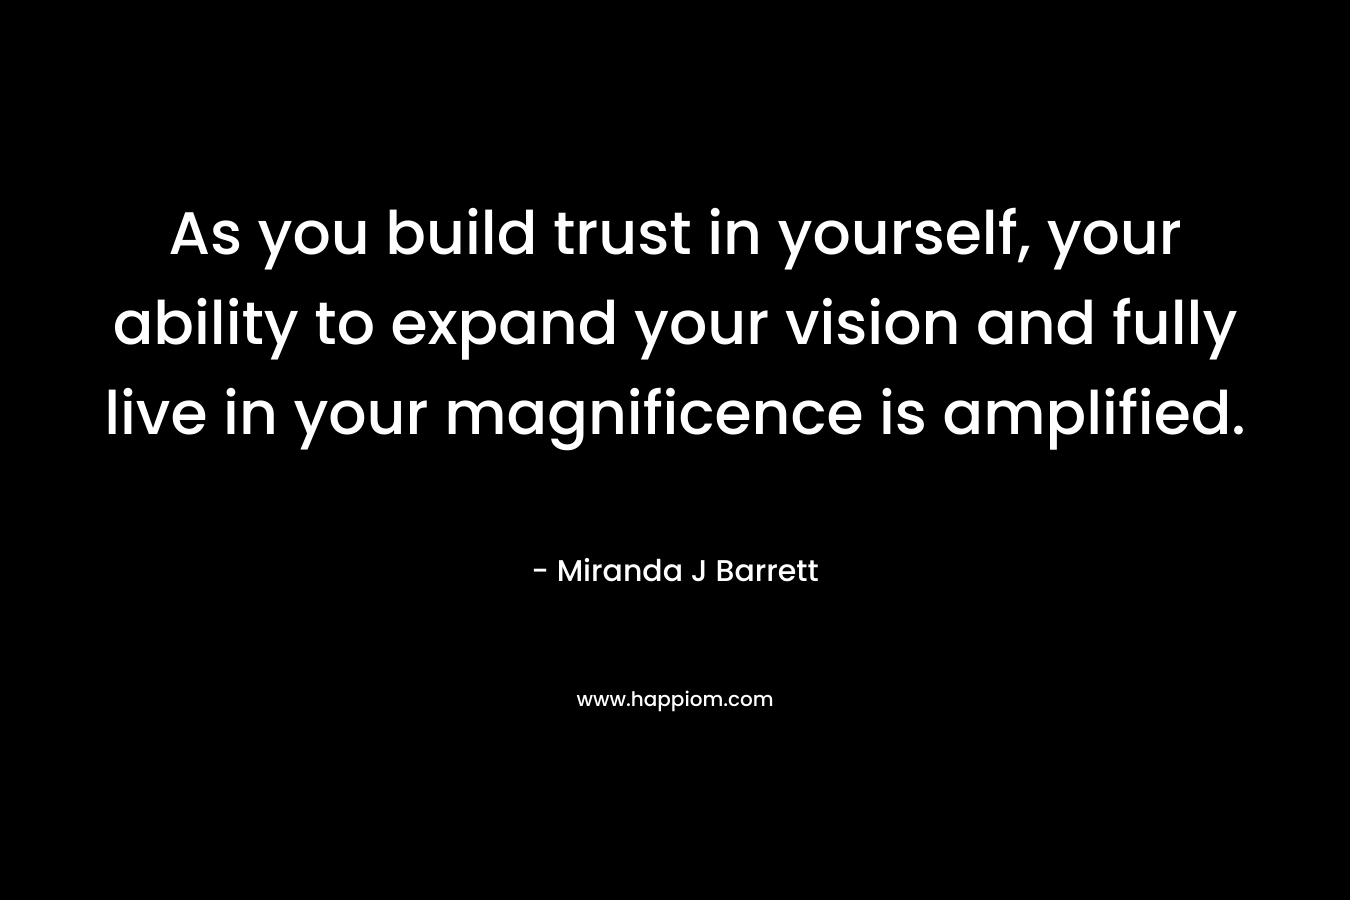 As you build trust in yourself, your ability to expand your vision and fully live in your magnificence is amplified. – Miranda J Barrett